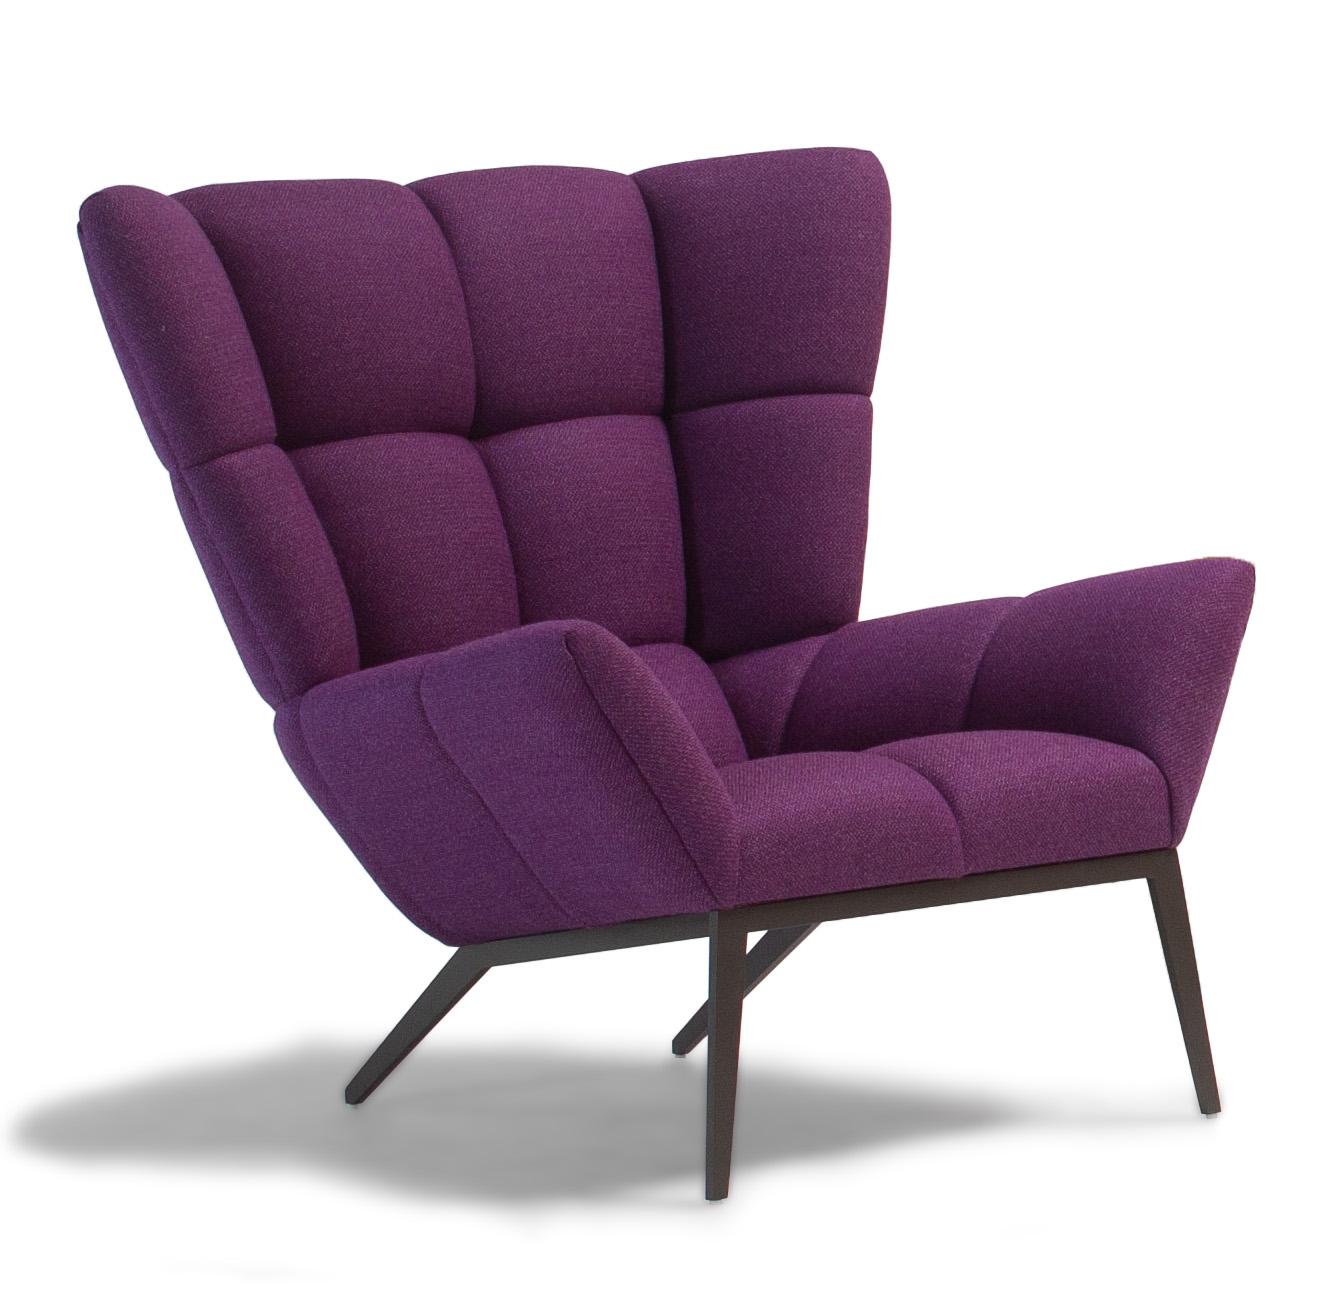 The Tuulla Chair takes the idea of tufting to a new level of comfort. The chair is “made” of tufts over an elegant and sophisticated form. With the lean of the chair and the tufted lumbar support, you’ll love this chair for its comfort as well as